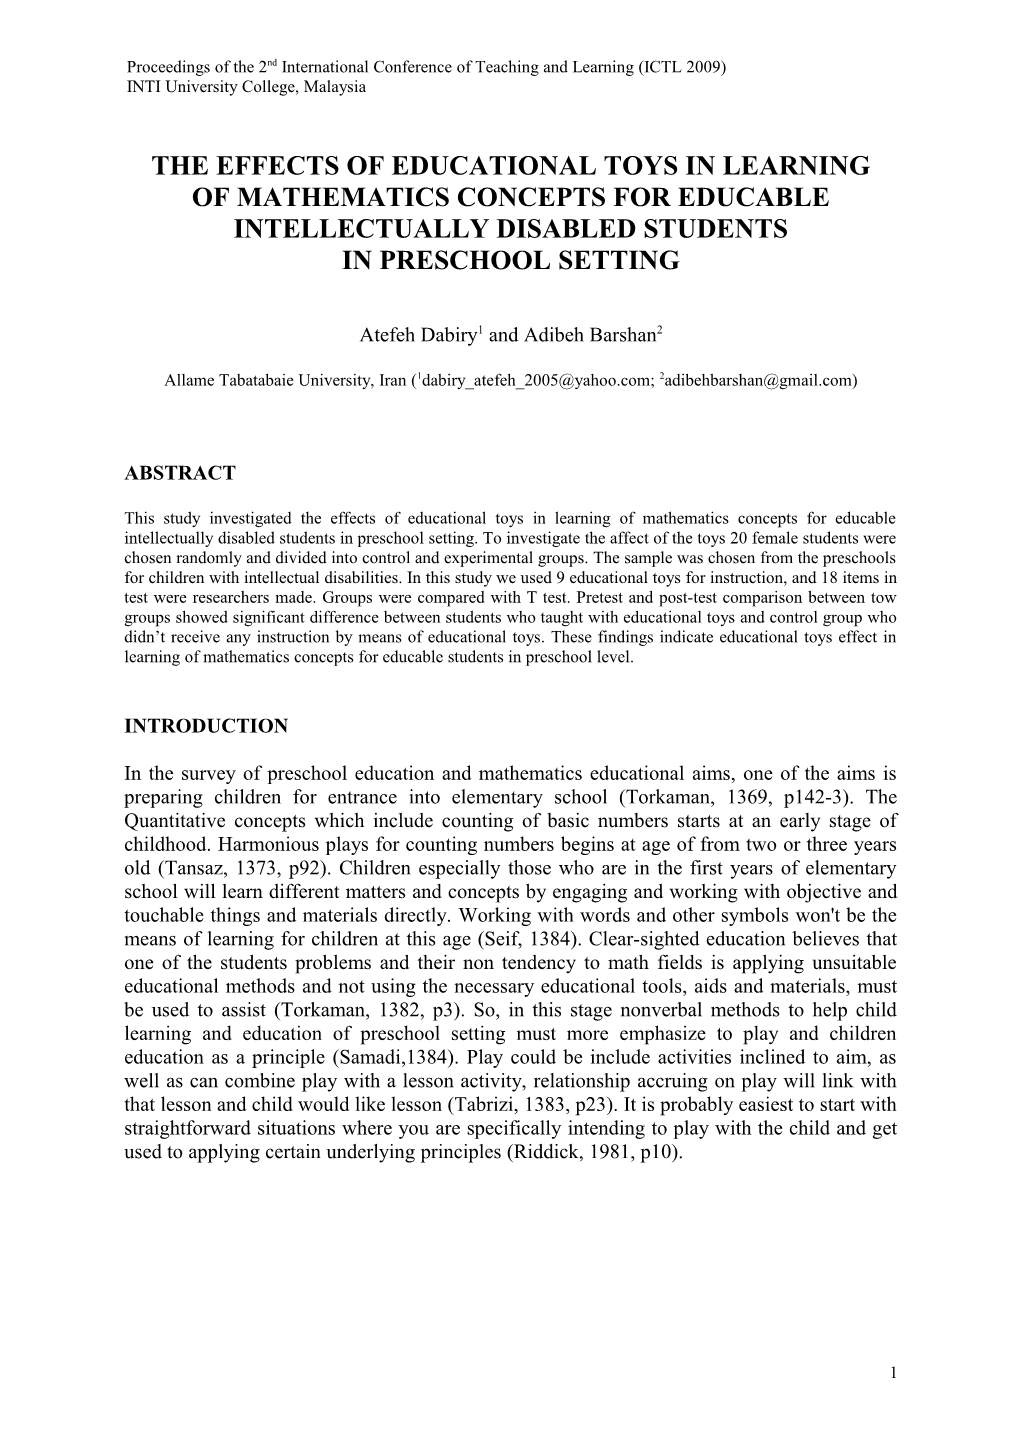 The Effects Of Educational Toys In Learning Of Mathematics Concepts For Educable Intellectually Disabled Students In Preschool Setting